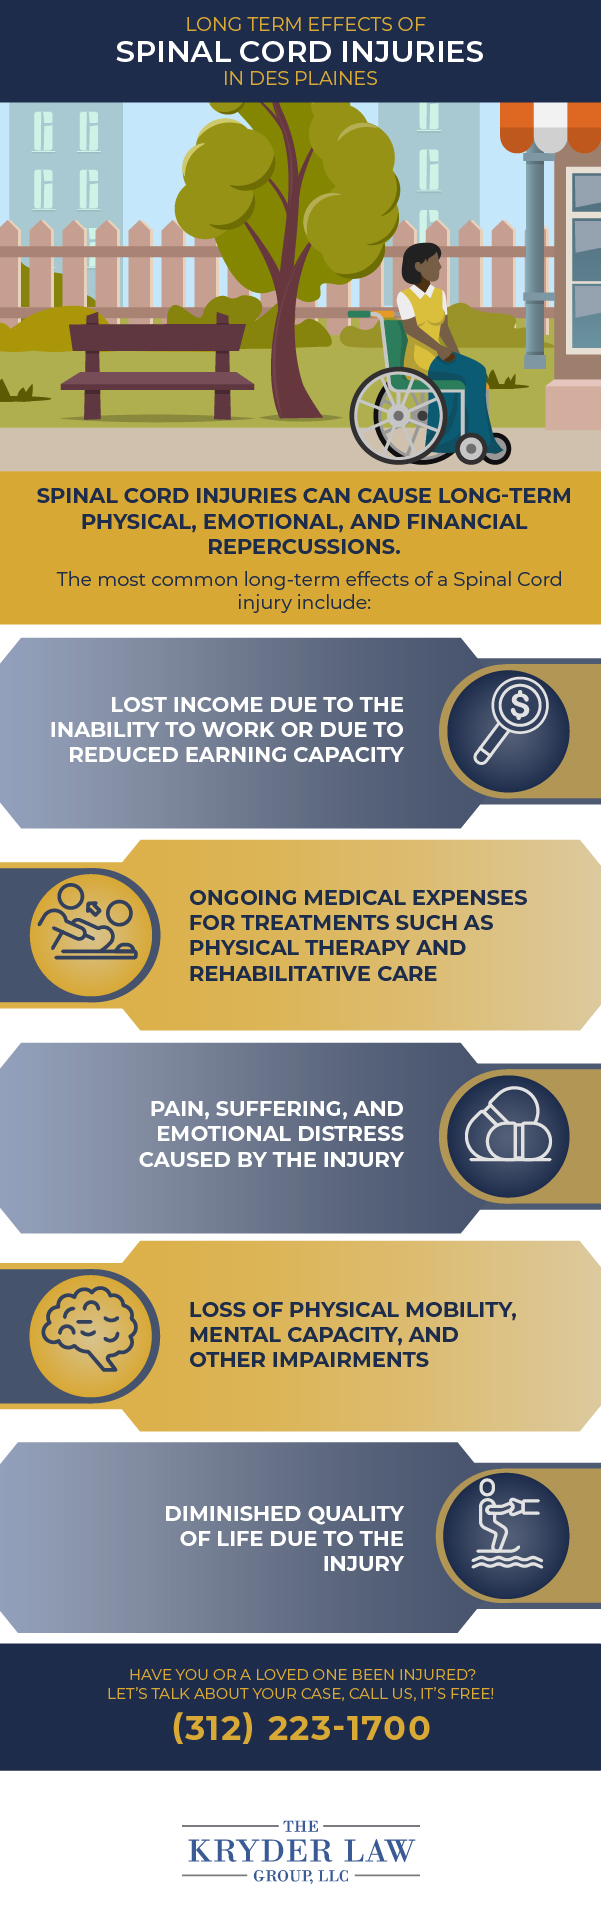 Long Term Effects of Spinal Cord Injuries in Des Plaines Infographic